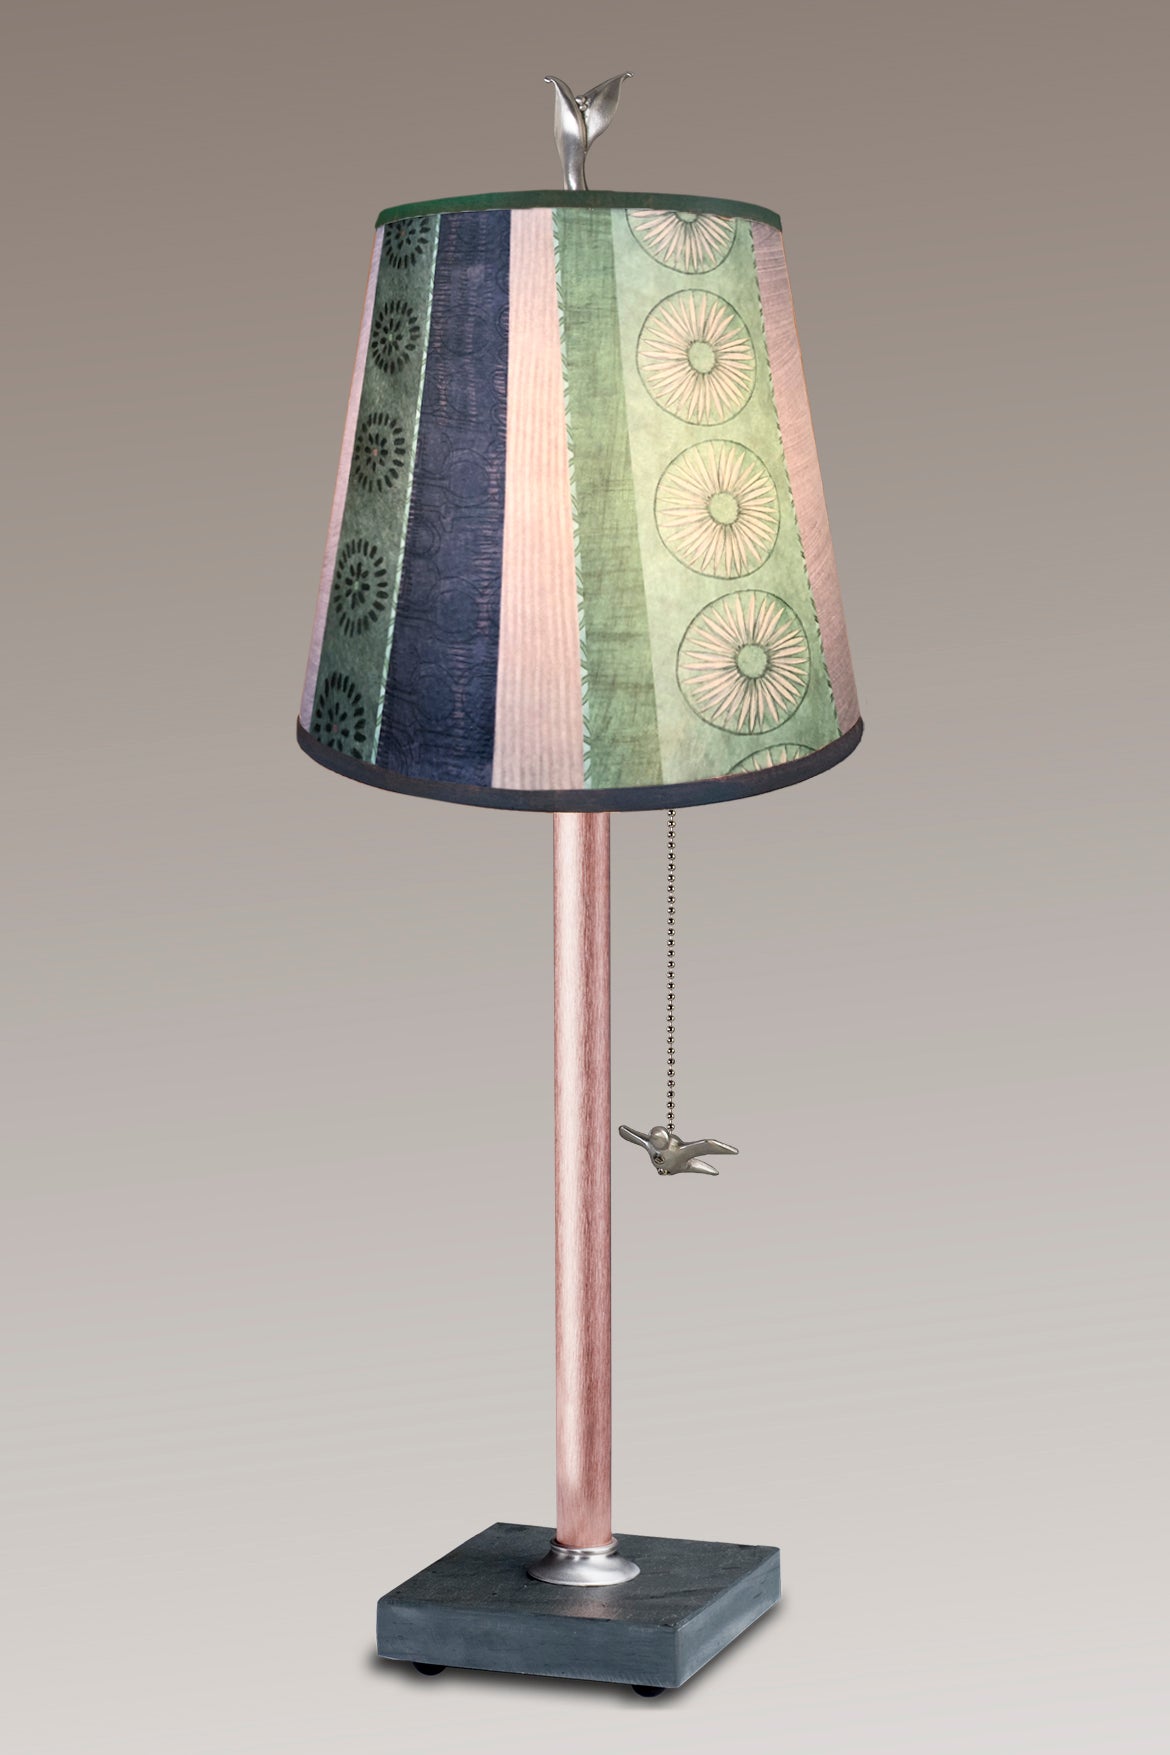 Janna Ugone &amp; Co Table Lamps Copper Table Lamp with Small Drum Shade in Serape Waters